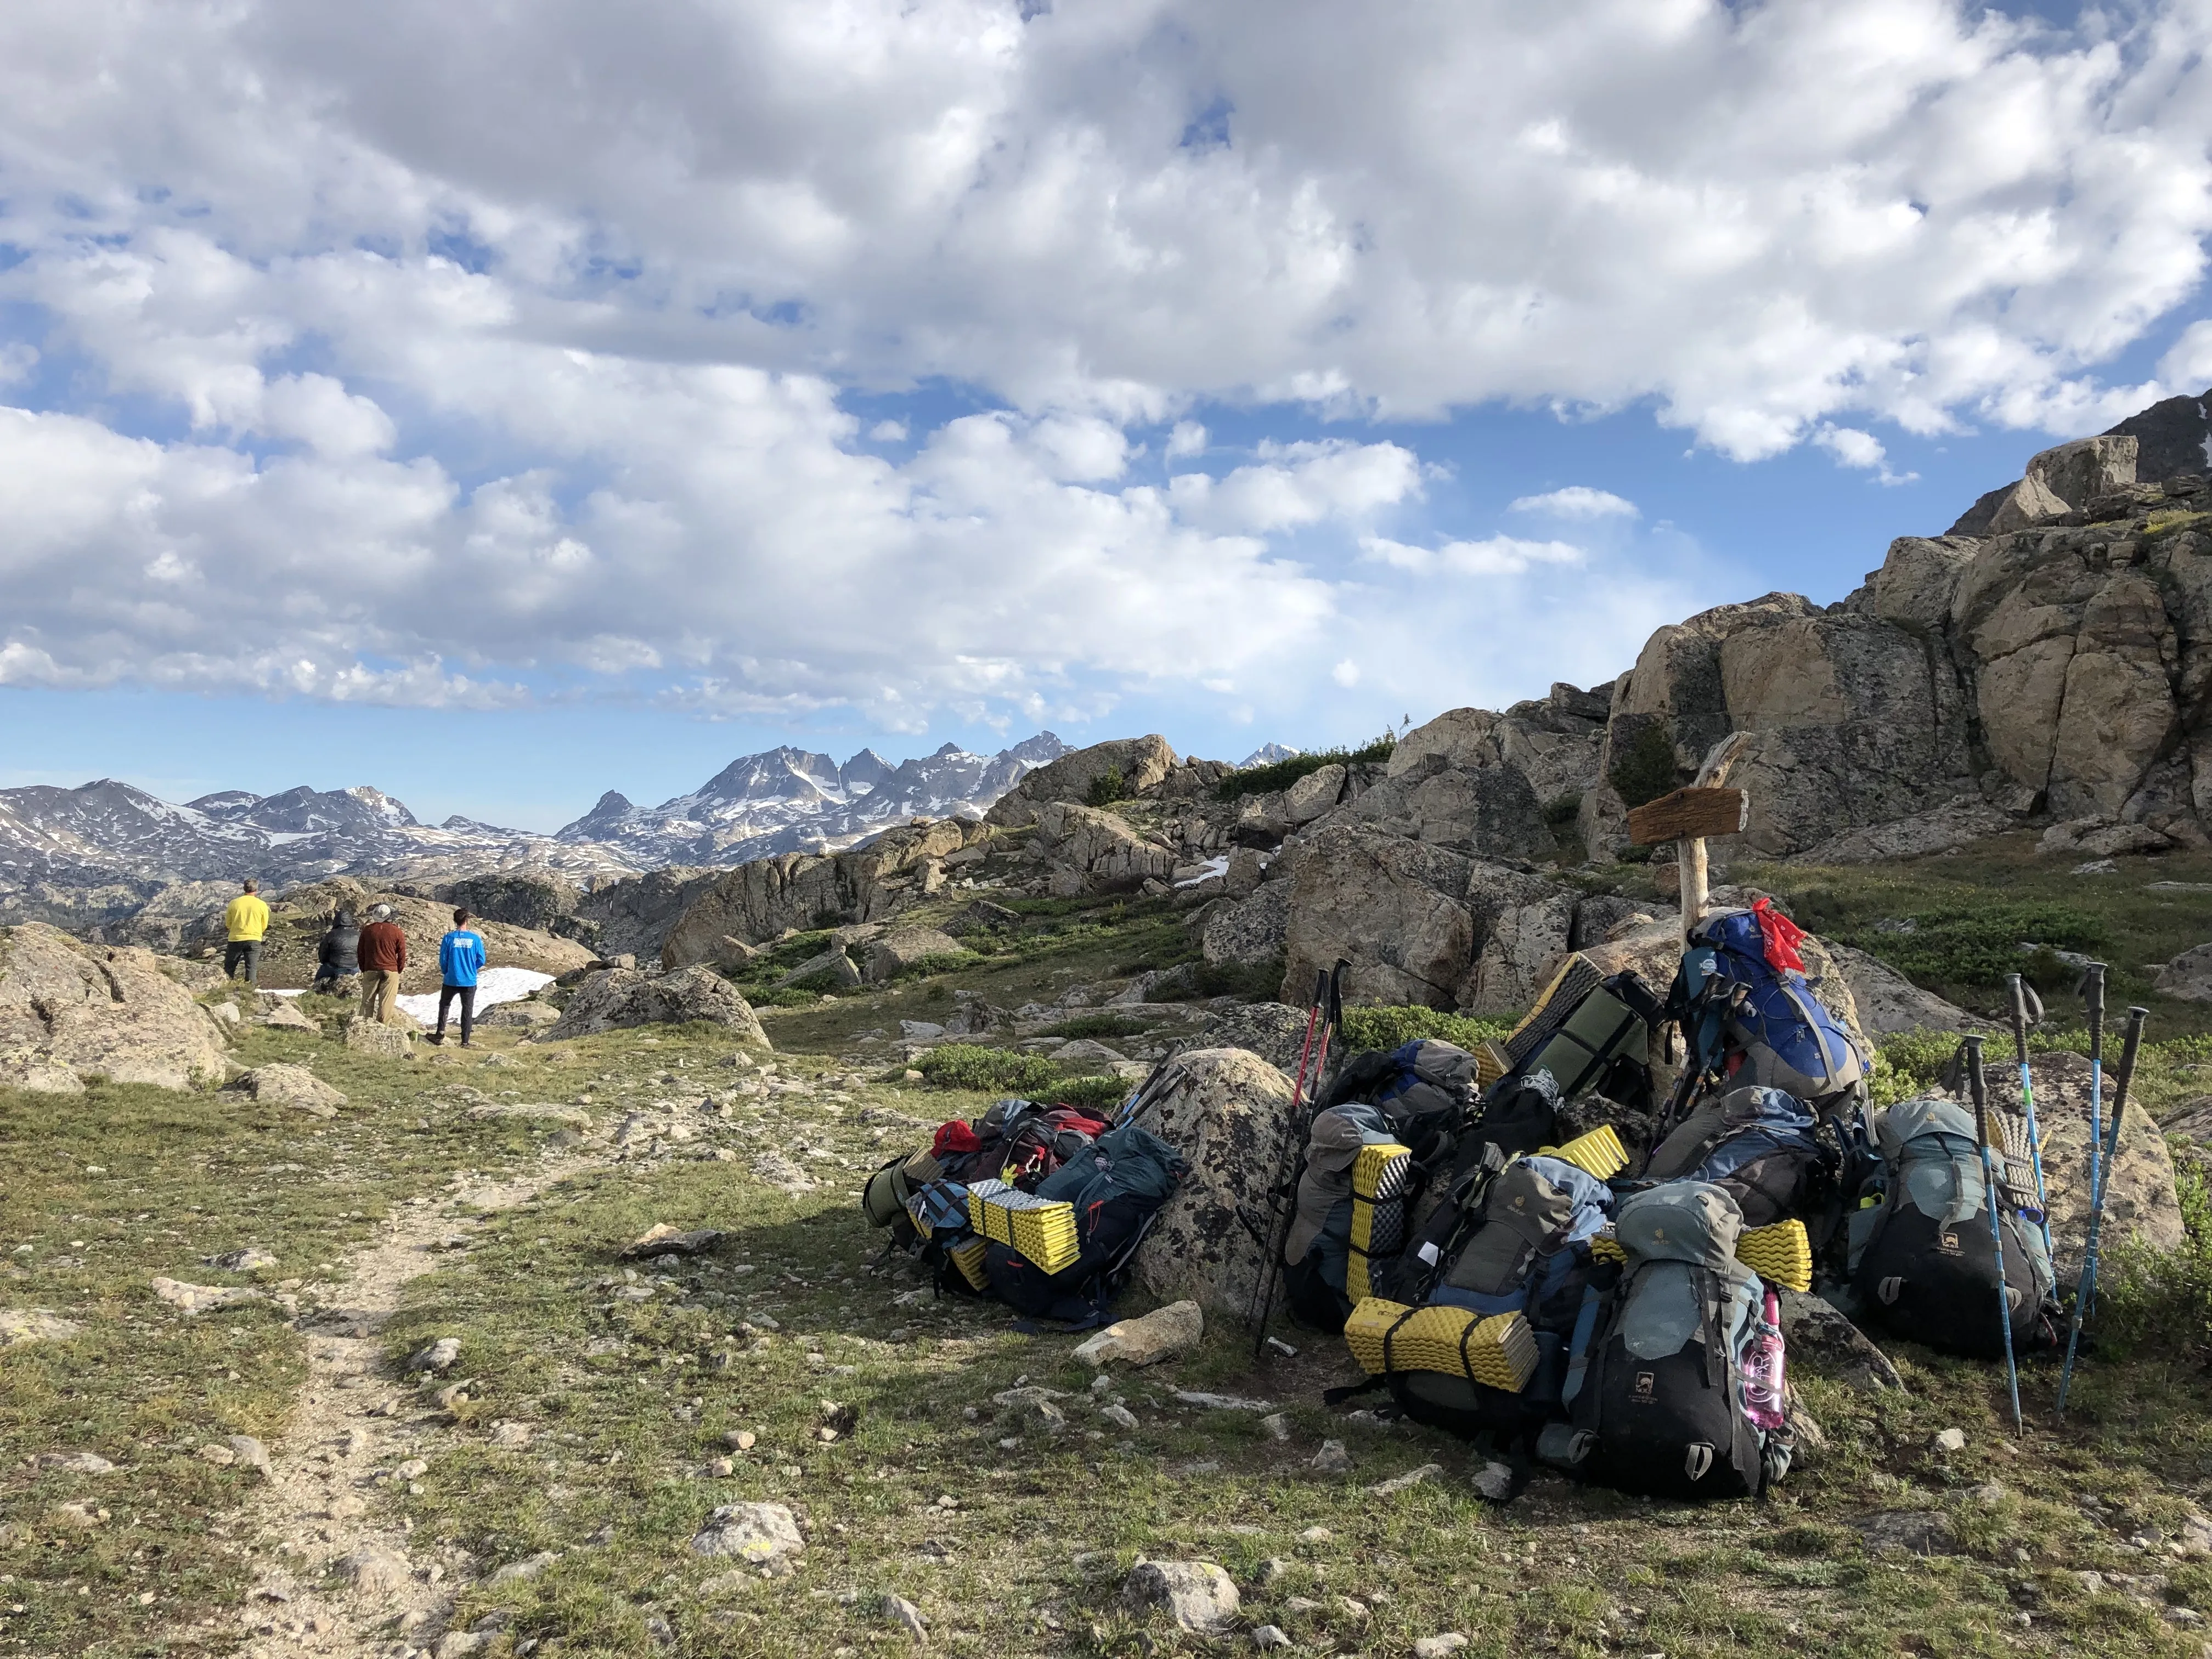 An Eden Invitation backpacking trip in Wyoming's Wind River Range, July 2019. Photo courtesy of Eden Invitation.?w=200&h=150